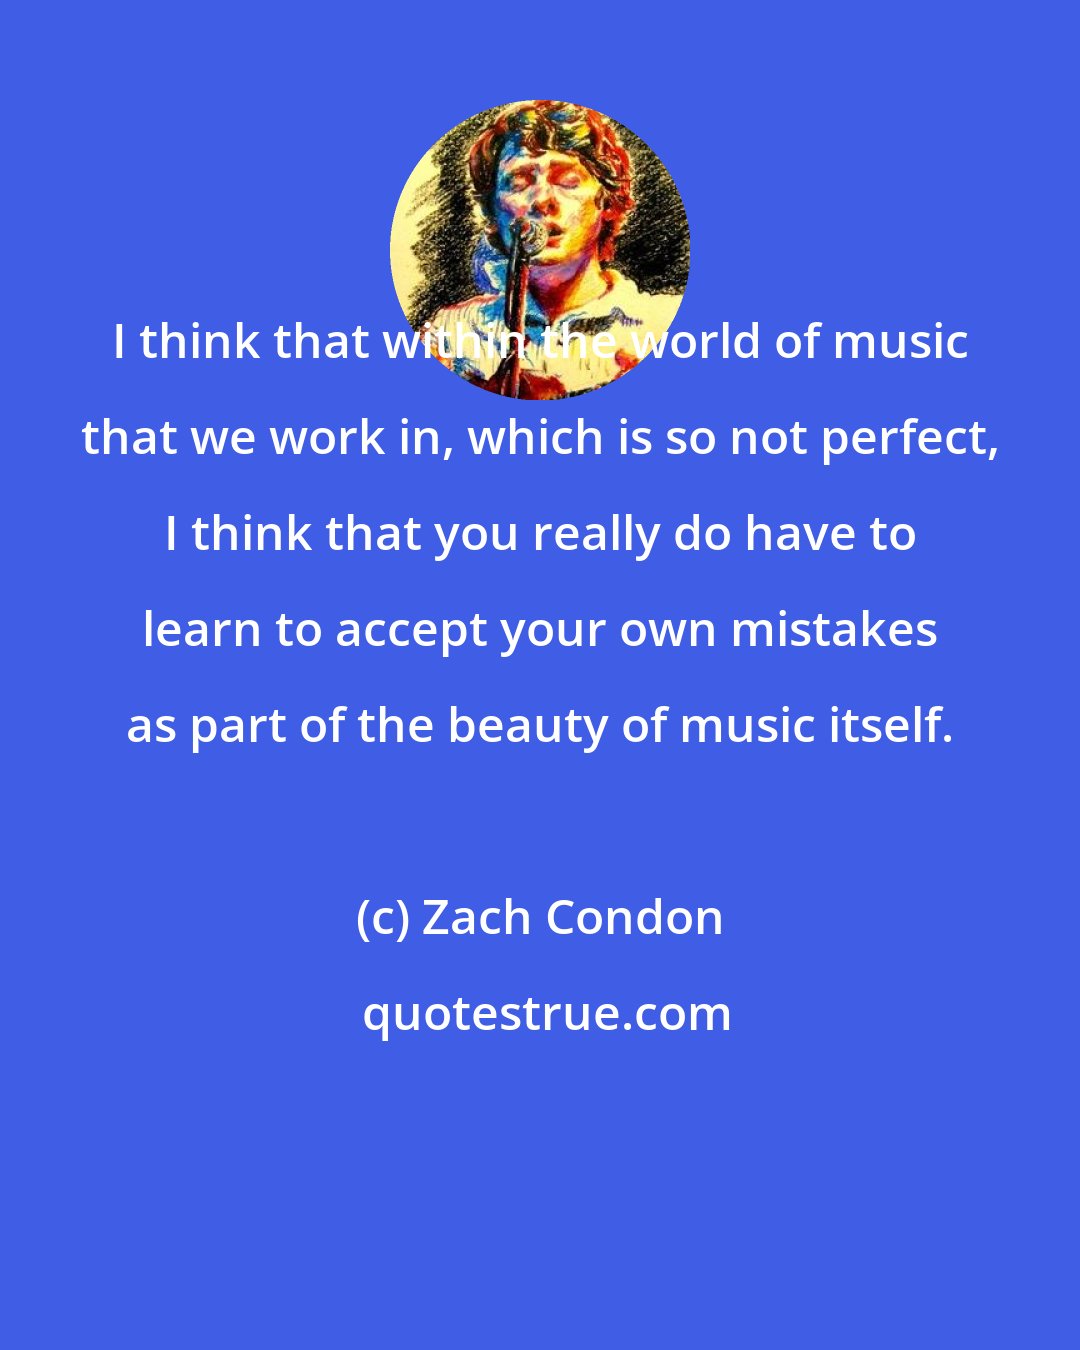 Zach Condon: I think that within the world of music that we work in, which is so not perfect, I think that you really do have to learn to accept your own mistakes as part of the beauty of music itself.